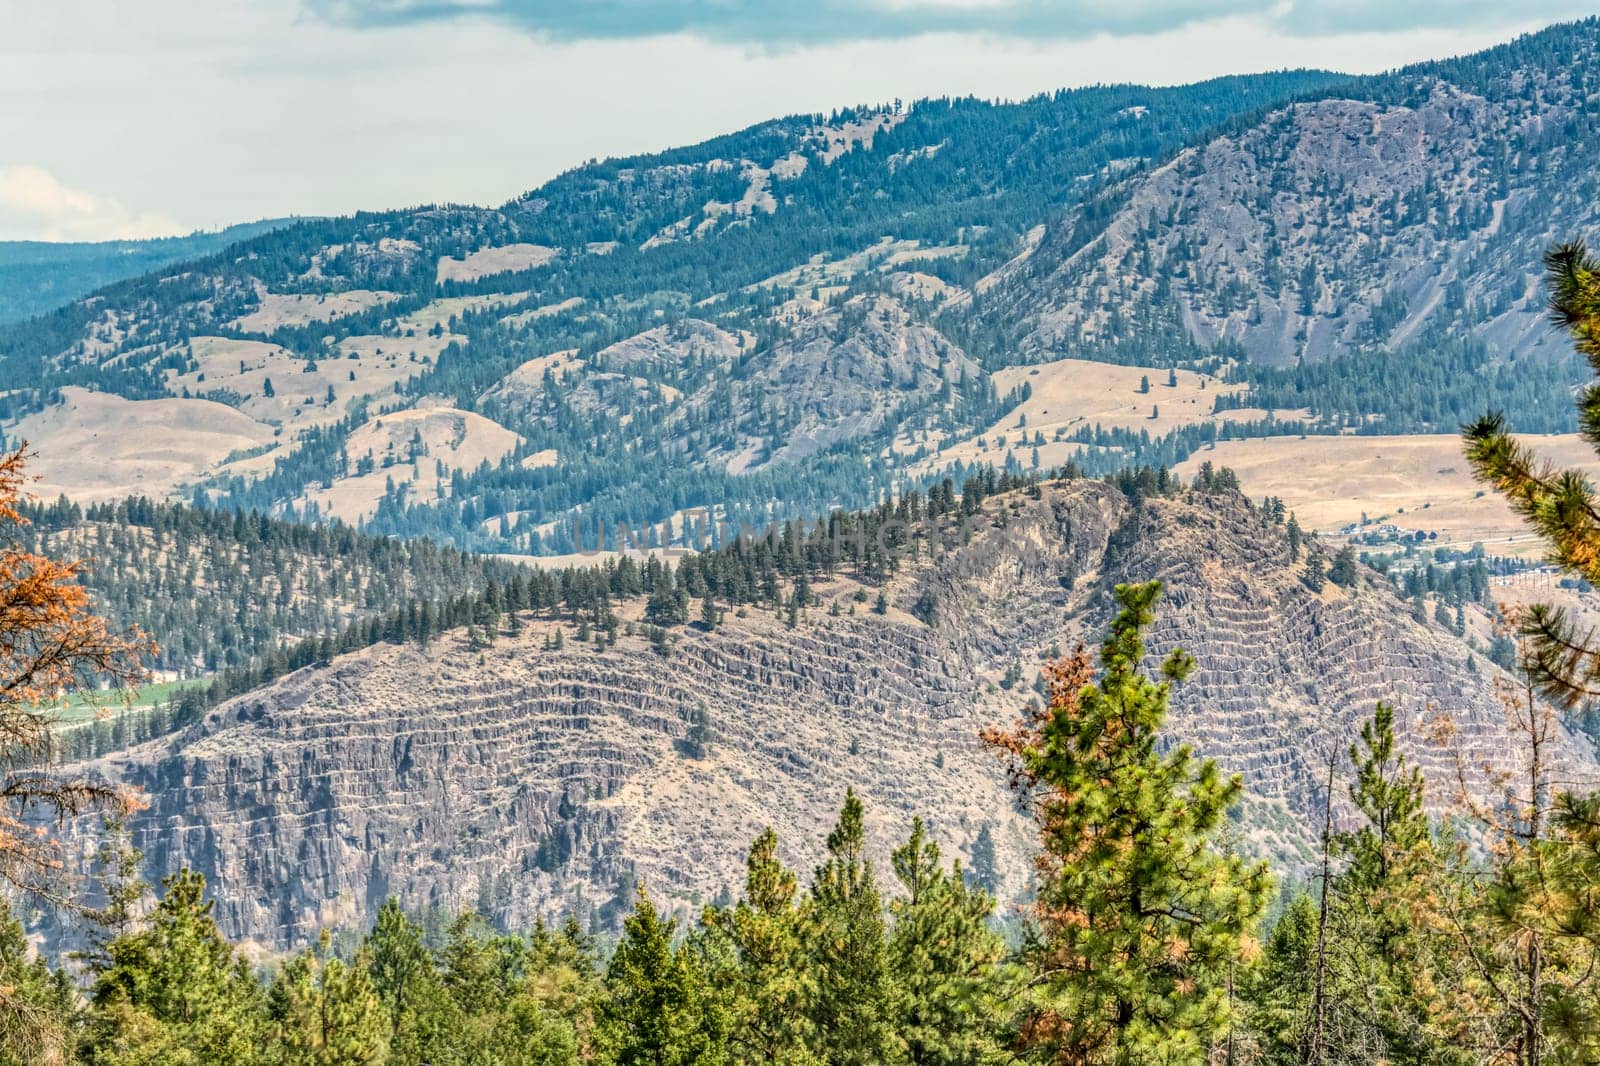 View on mountain tops in Myra canyon of Okanagan valley by Imagenet